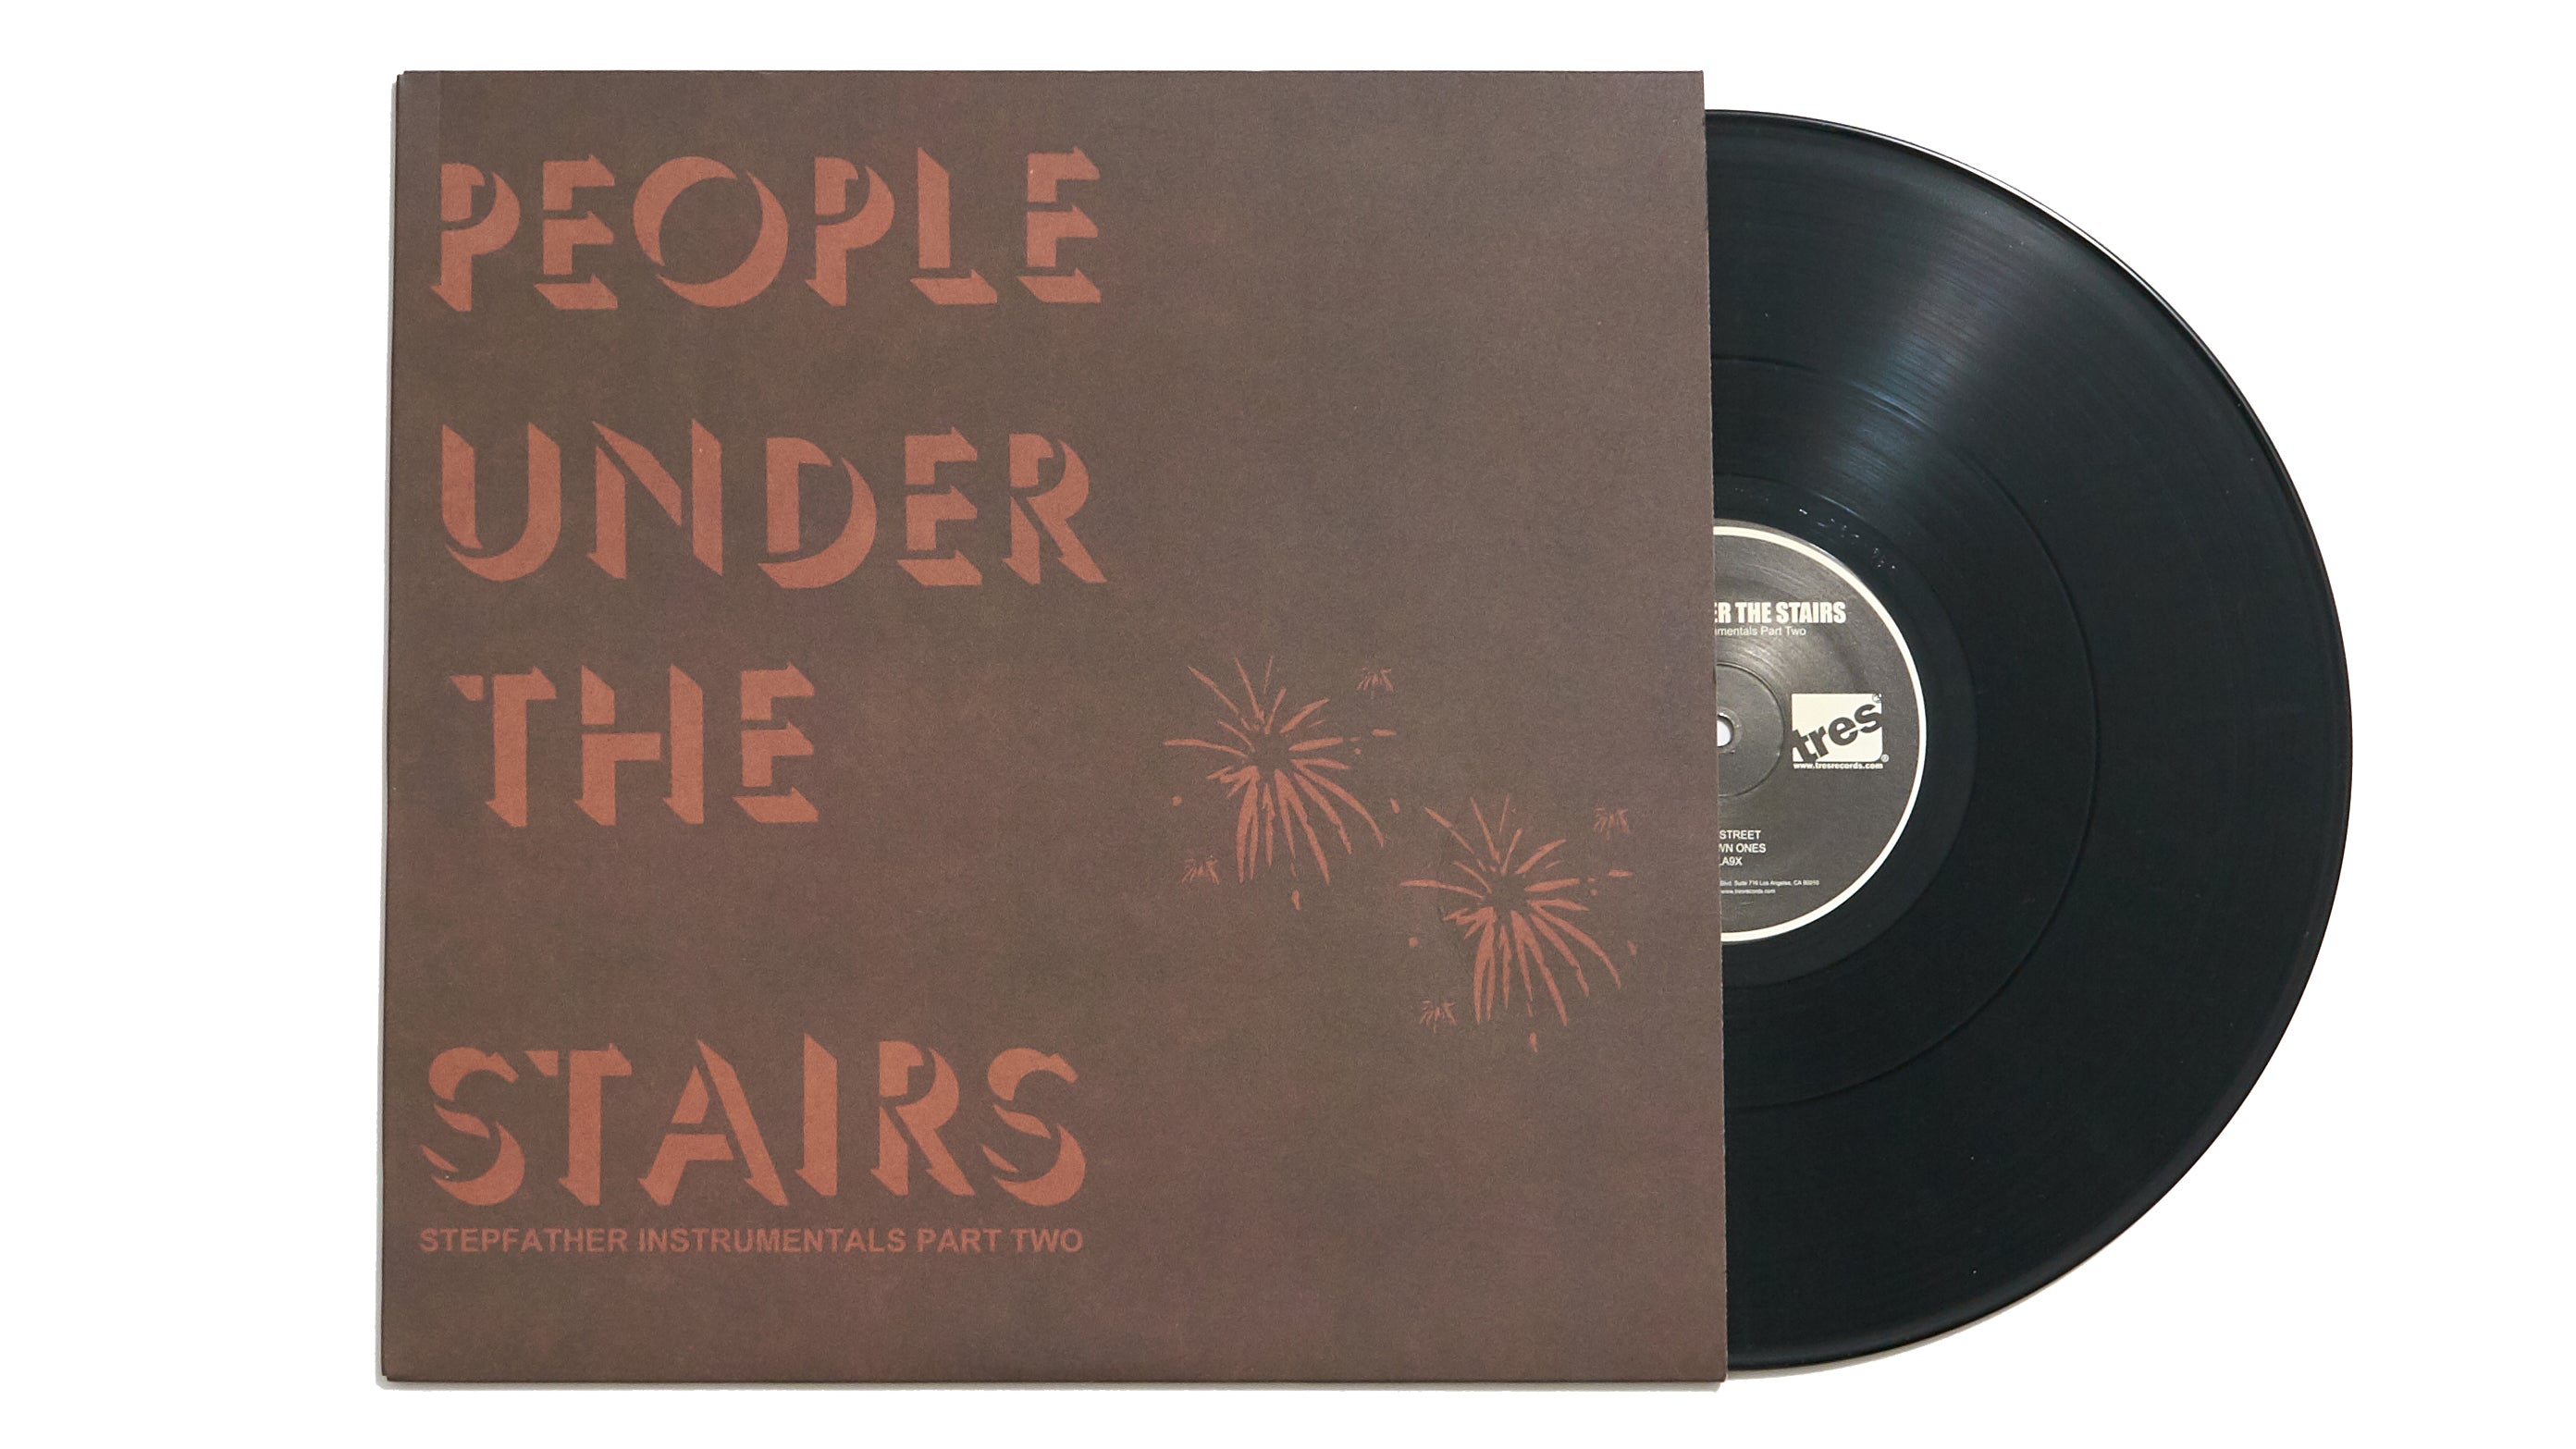 People Under The Stairs "Stepfather Instrumentals Part Two" (12")